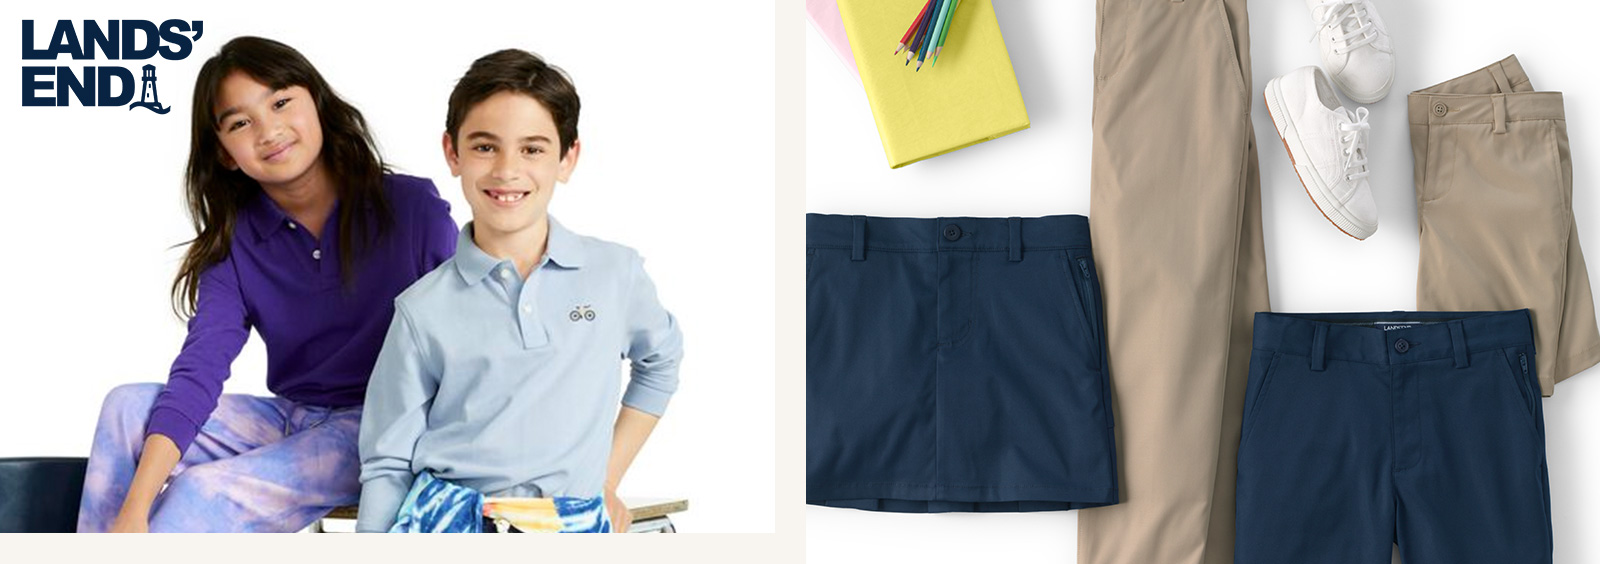 How to Get Your Child Excited About School Uniforms